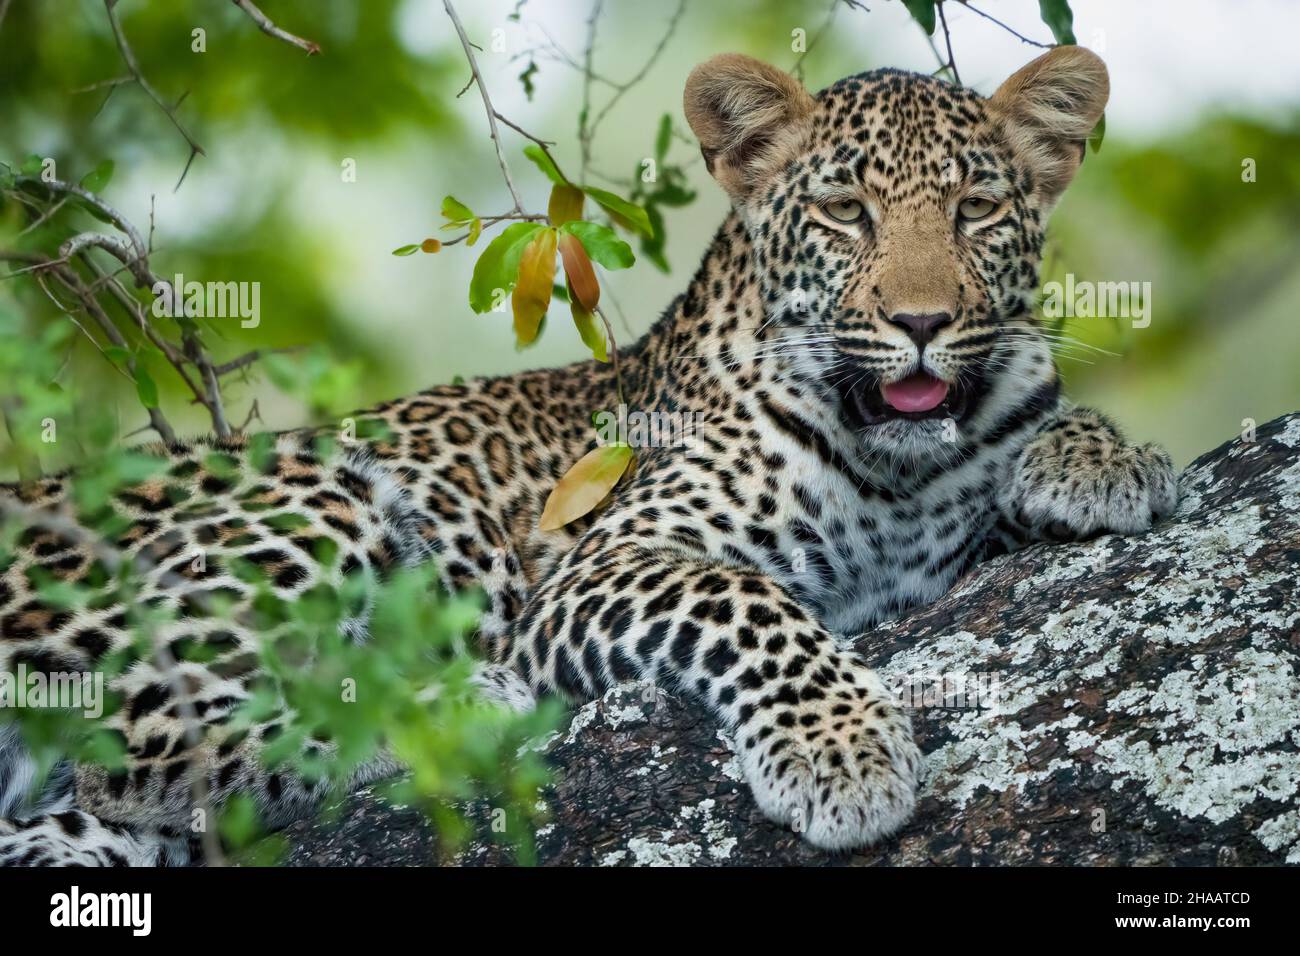 Leopard (Panthera Pardus) female in a African ebony or jackal-berry (Diospyros mespiliformis) tree. South Africa. Stock Photo